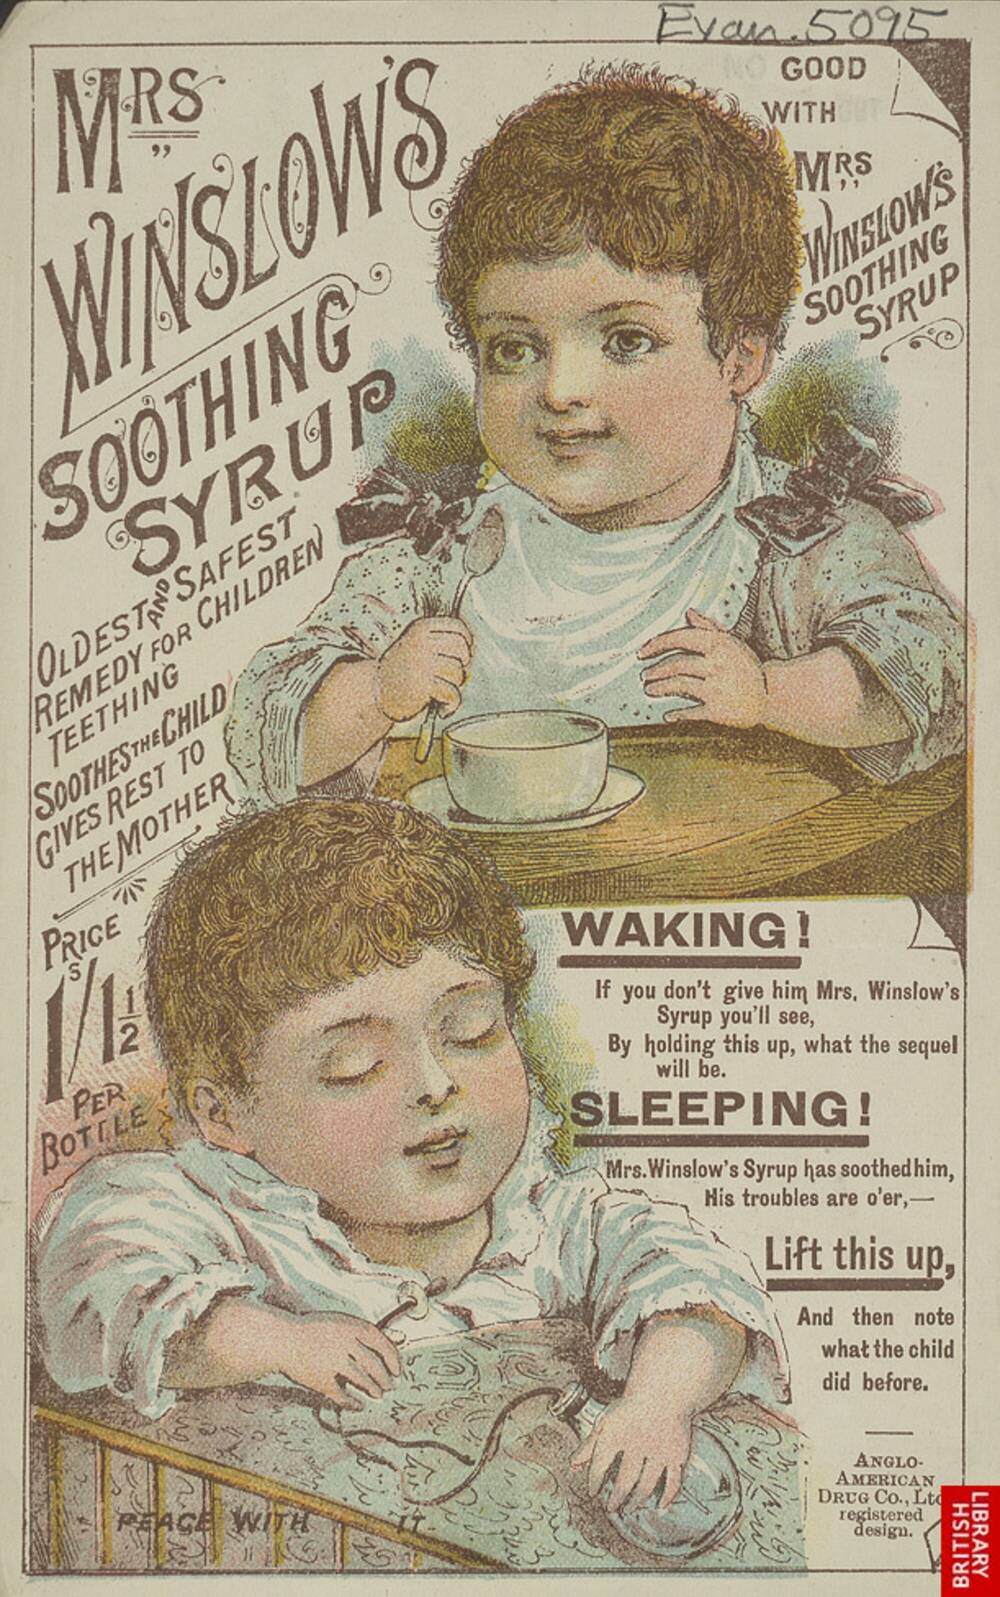 Poster advertising Mrs Winslow's soothing syrup, showing two small children, one sitting in a highchair with a bowl and spoon, and one asleep in a cot.